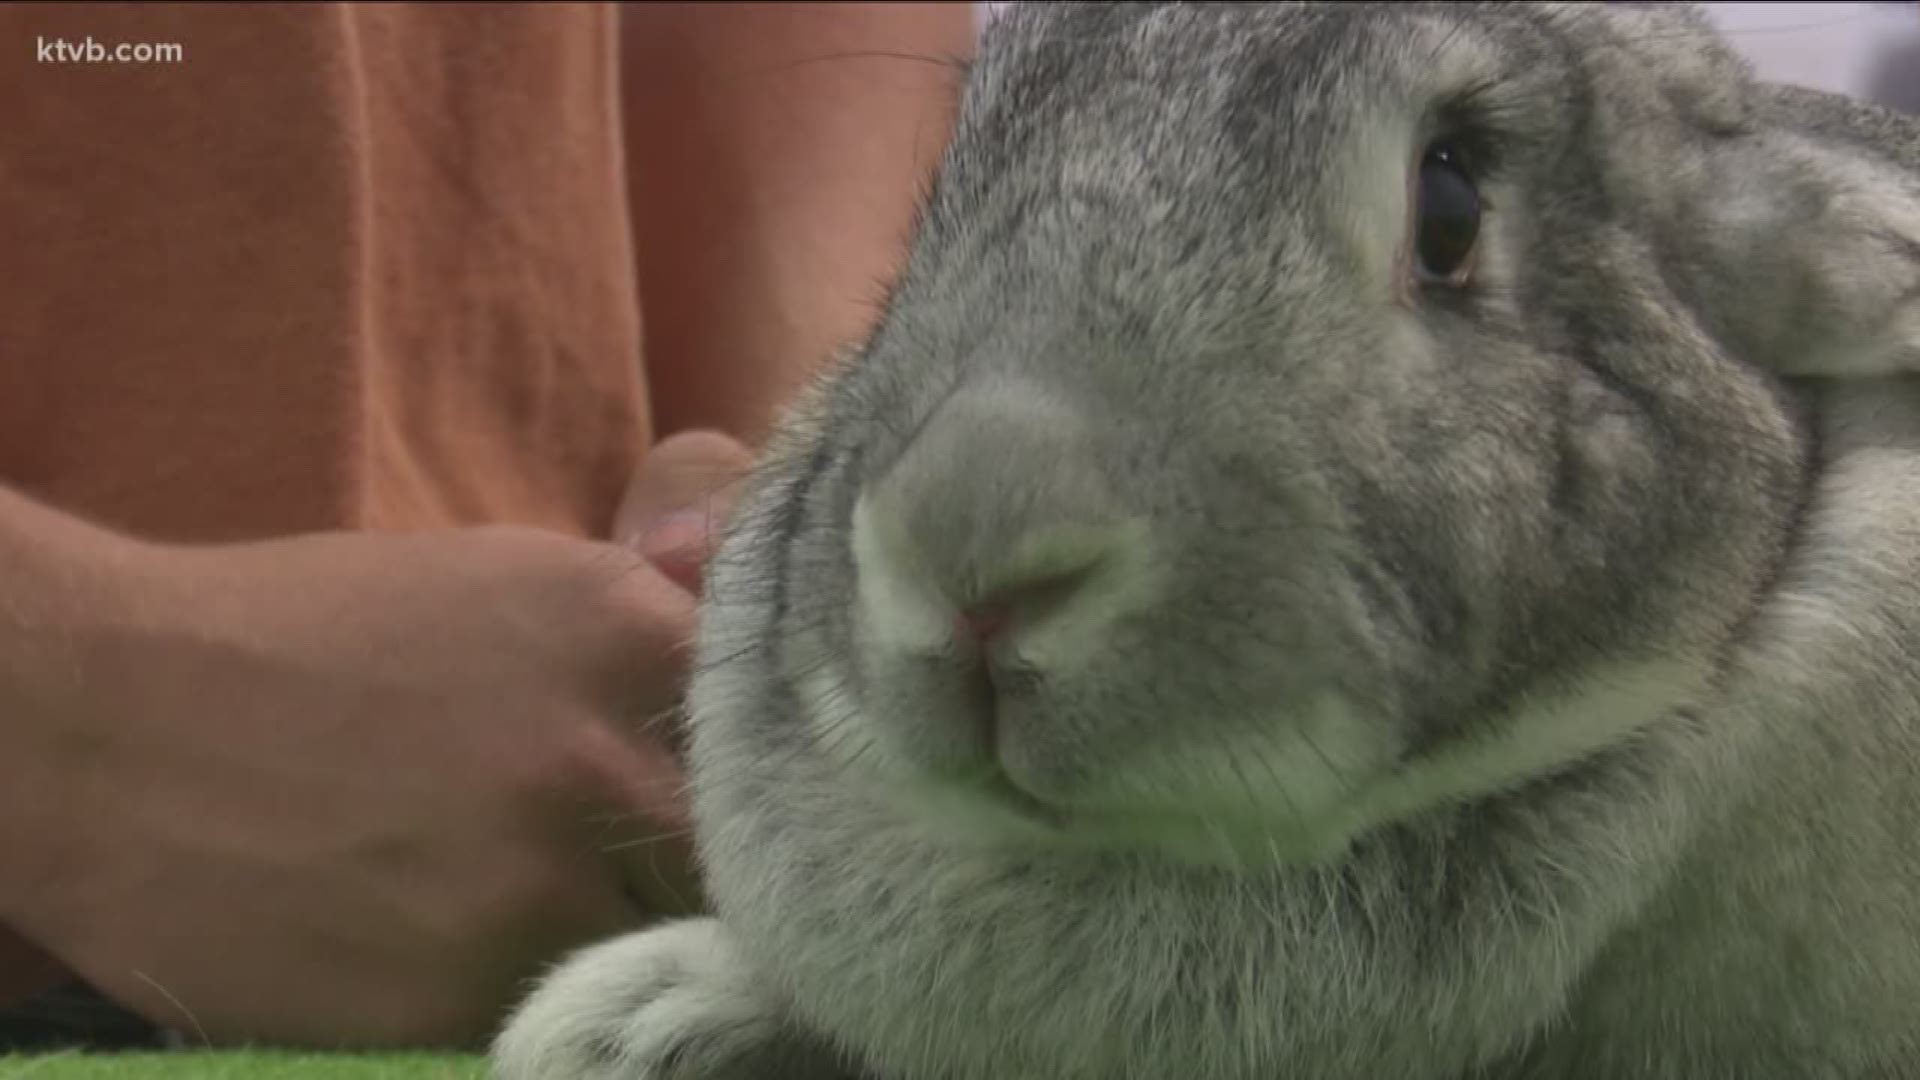 KTVB caught up with one teenager who raises rabbits.